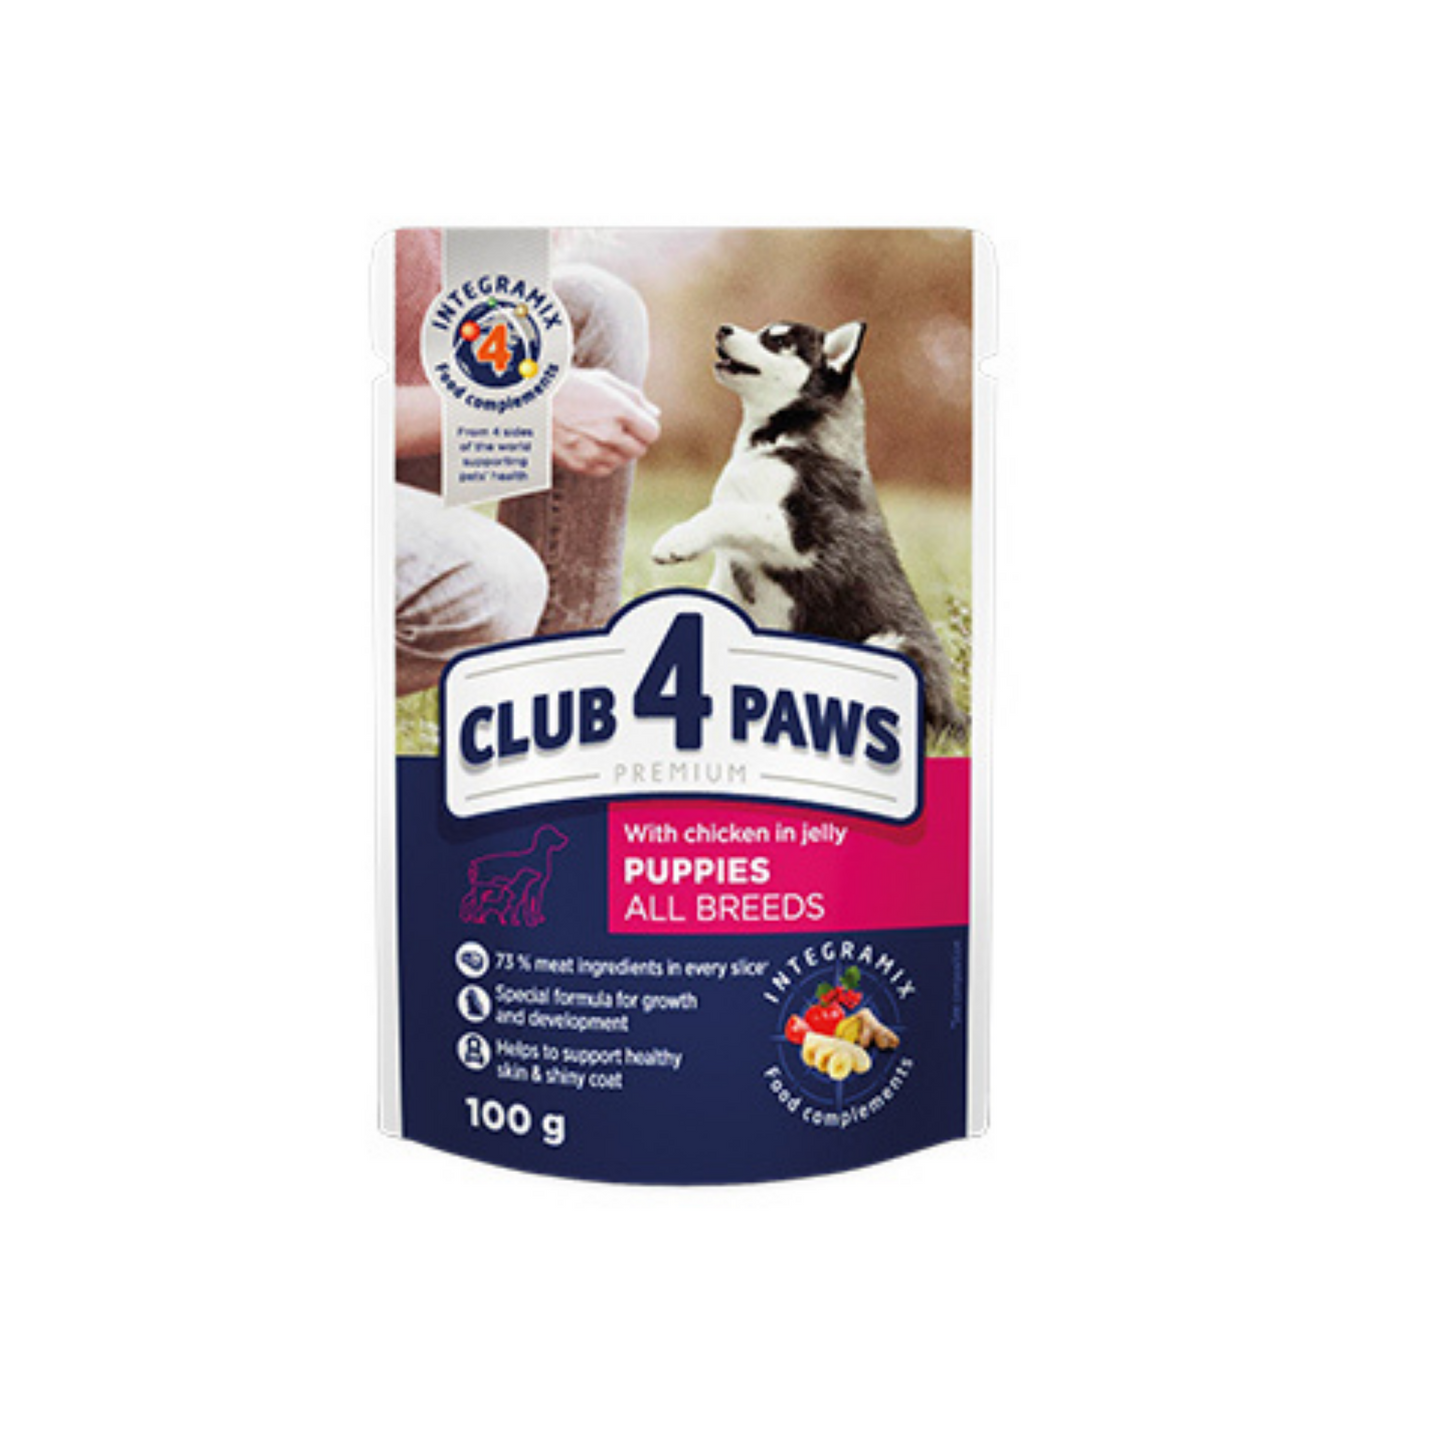 CLUB 4 PAWS Premium For Puppies Pouches "Chicken in Jelly"